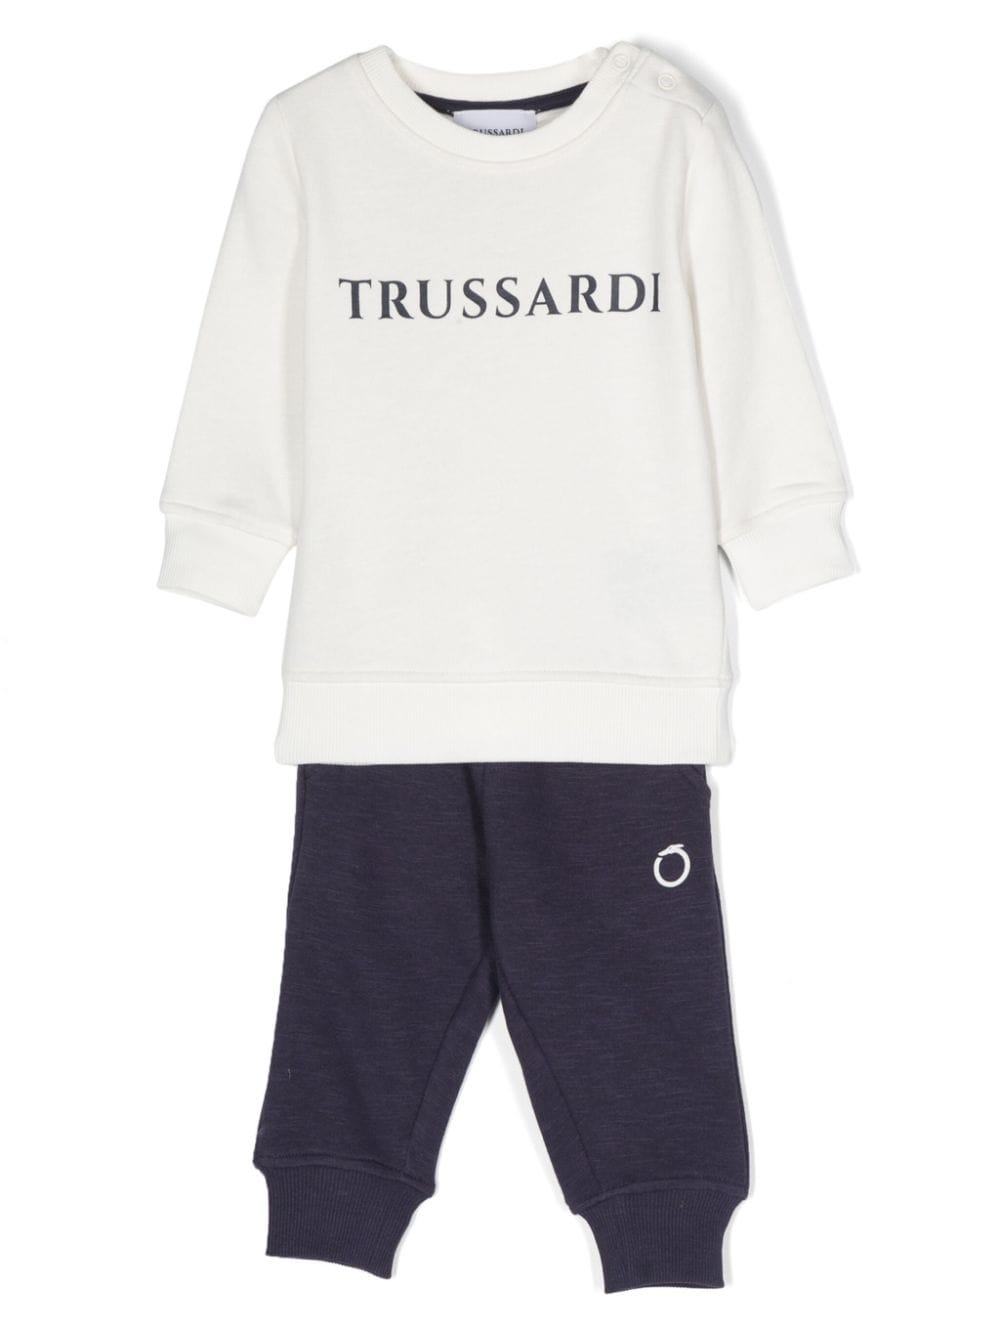 White and navy blue sports suit for boys with logo